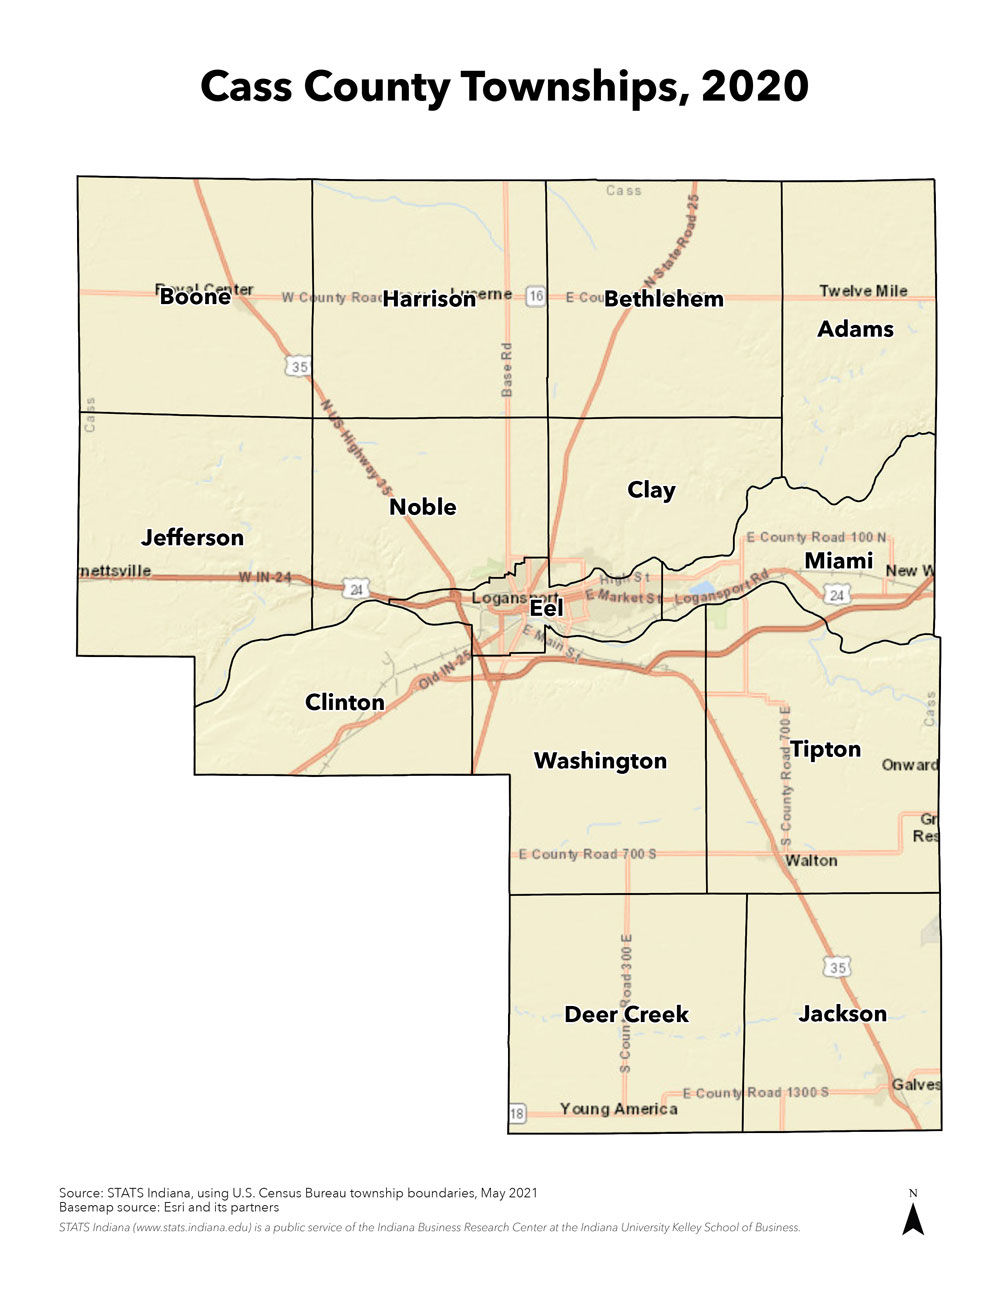 Map of Cass County, Indiana townships as of 2020